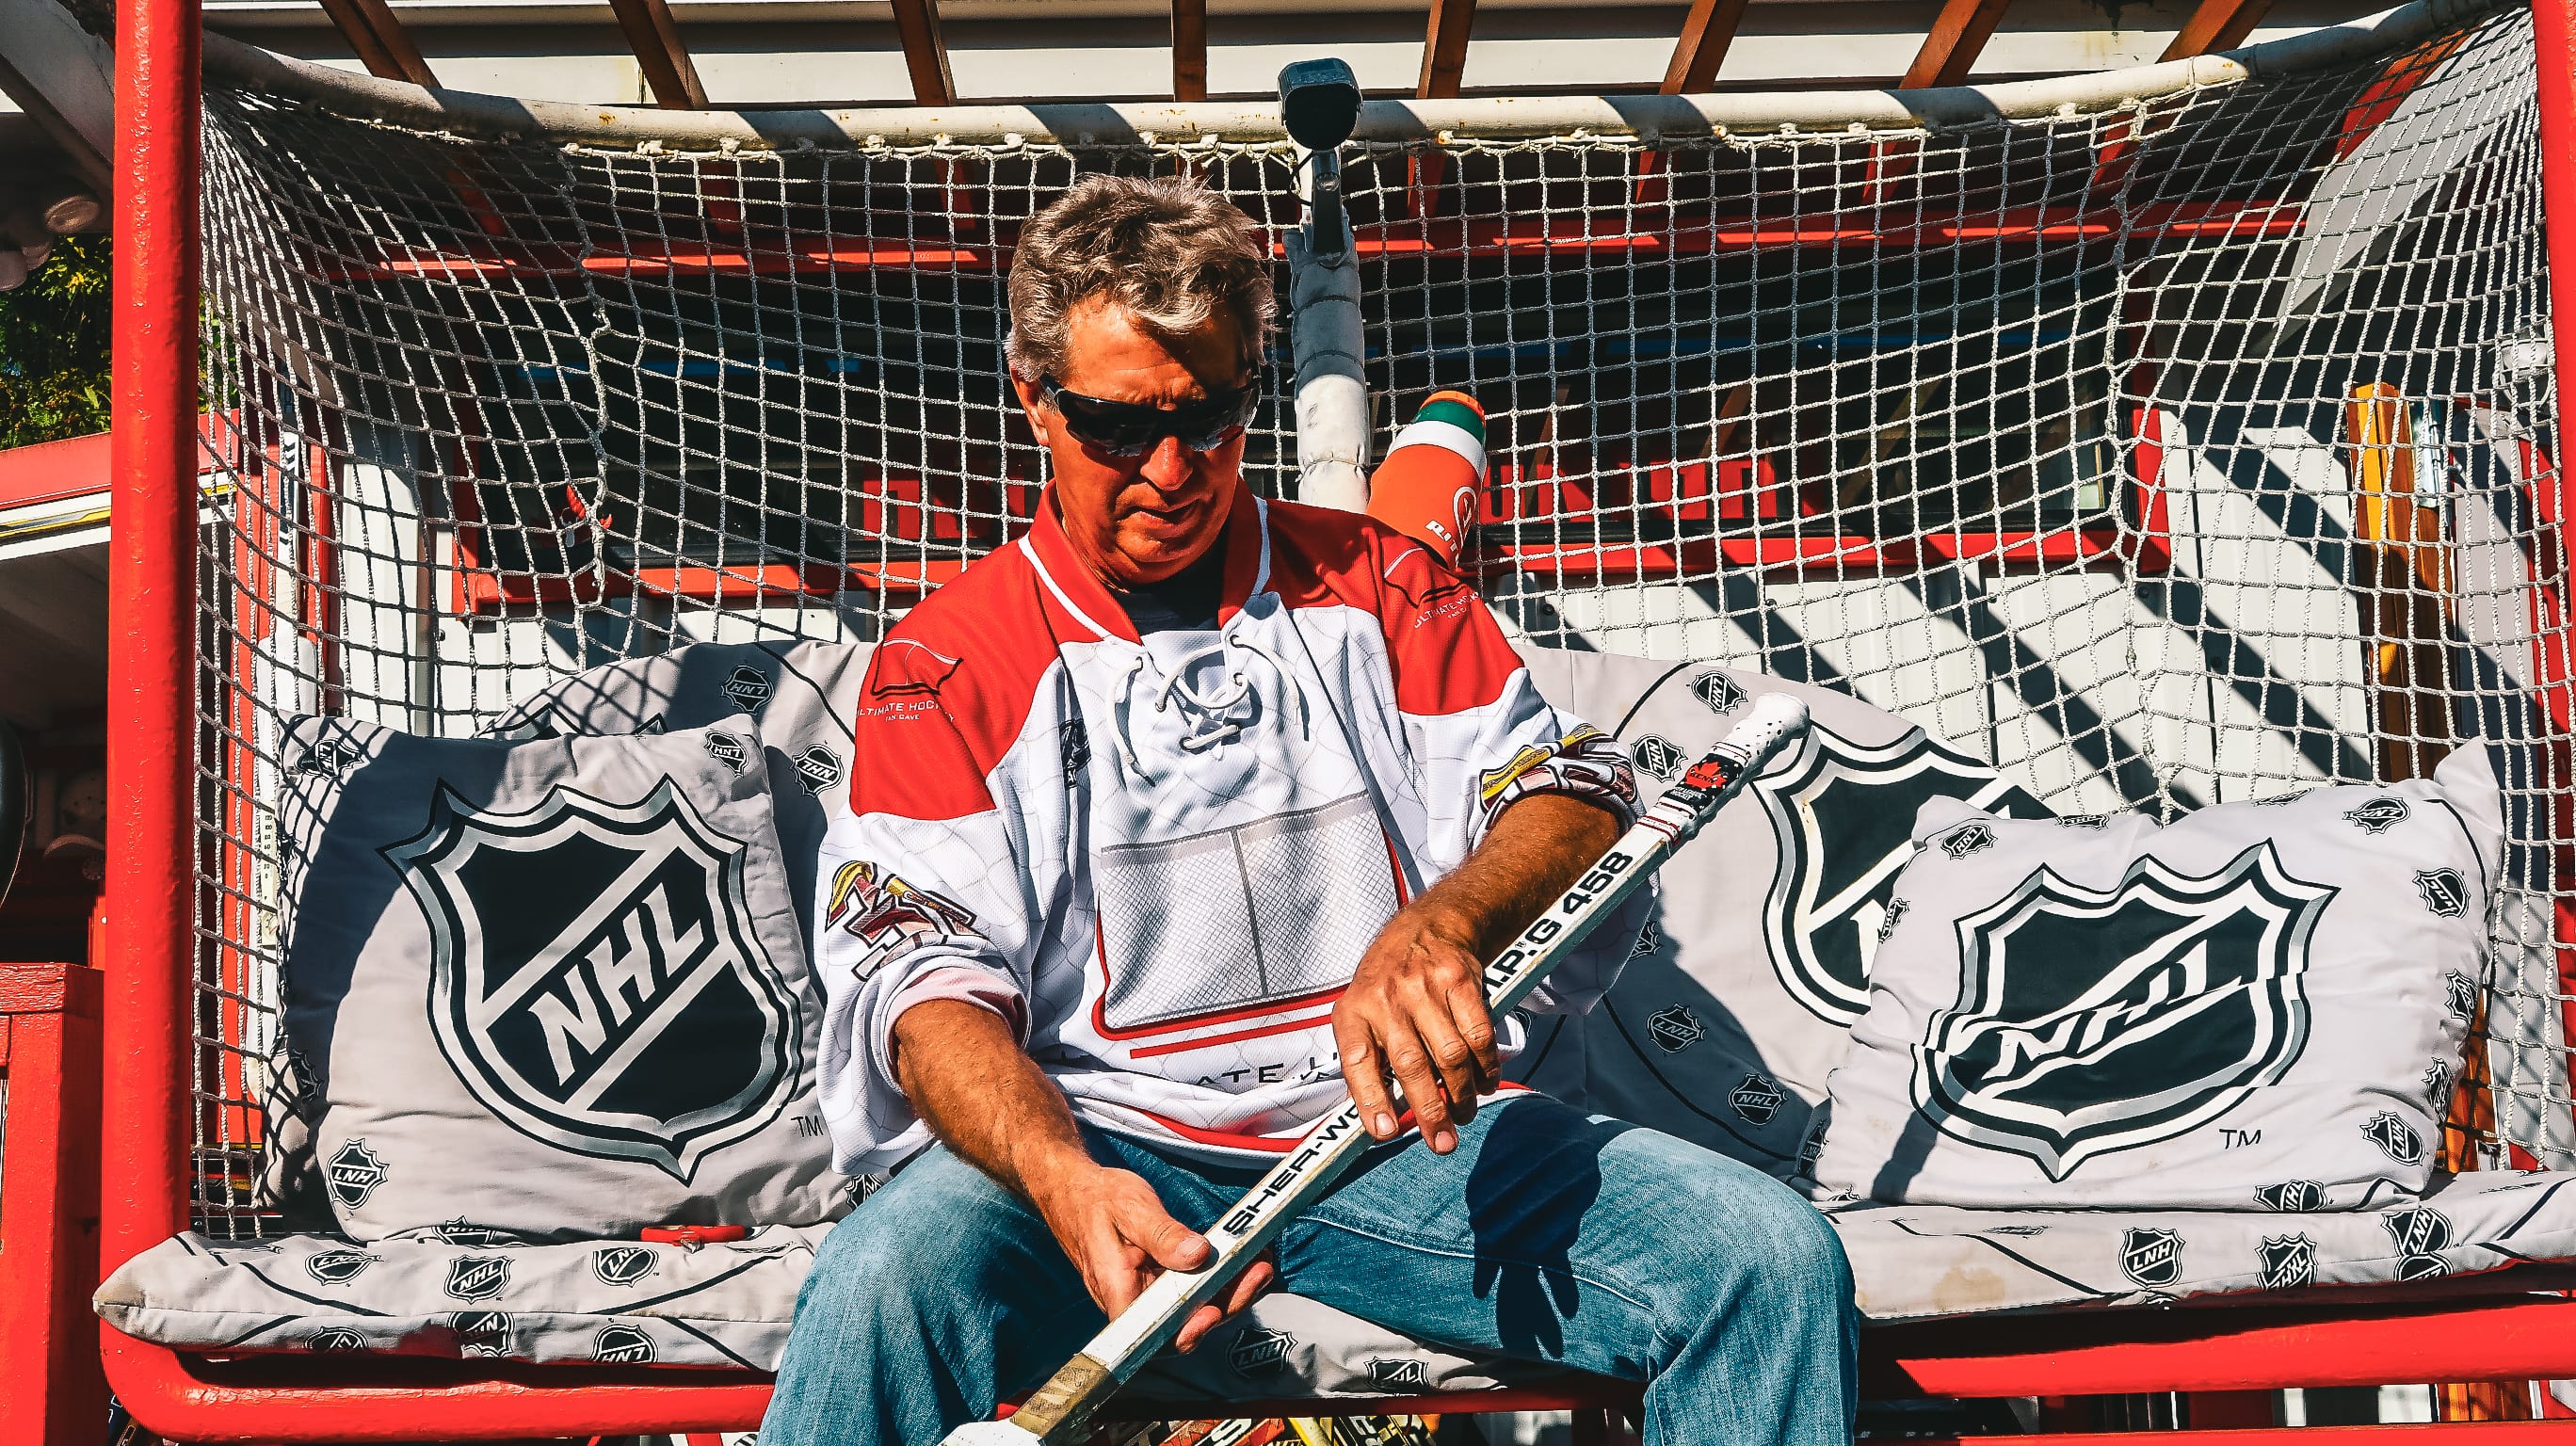 Sniper Skin Collaborates With Ultimate Hockey Fan Cave to Bring you The Beer League Grips